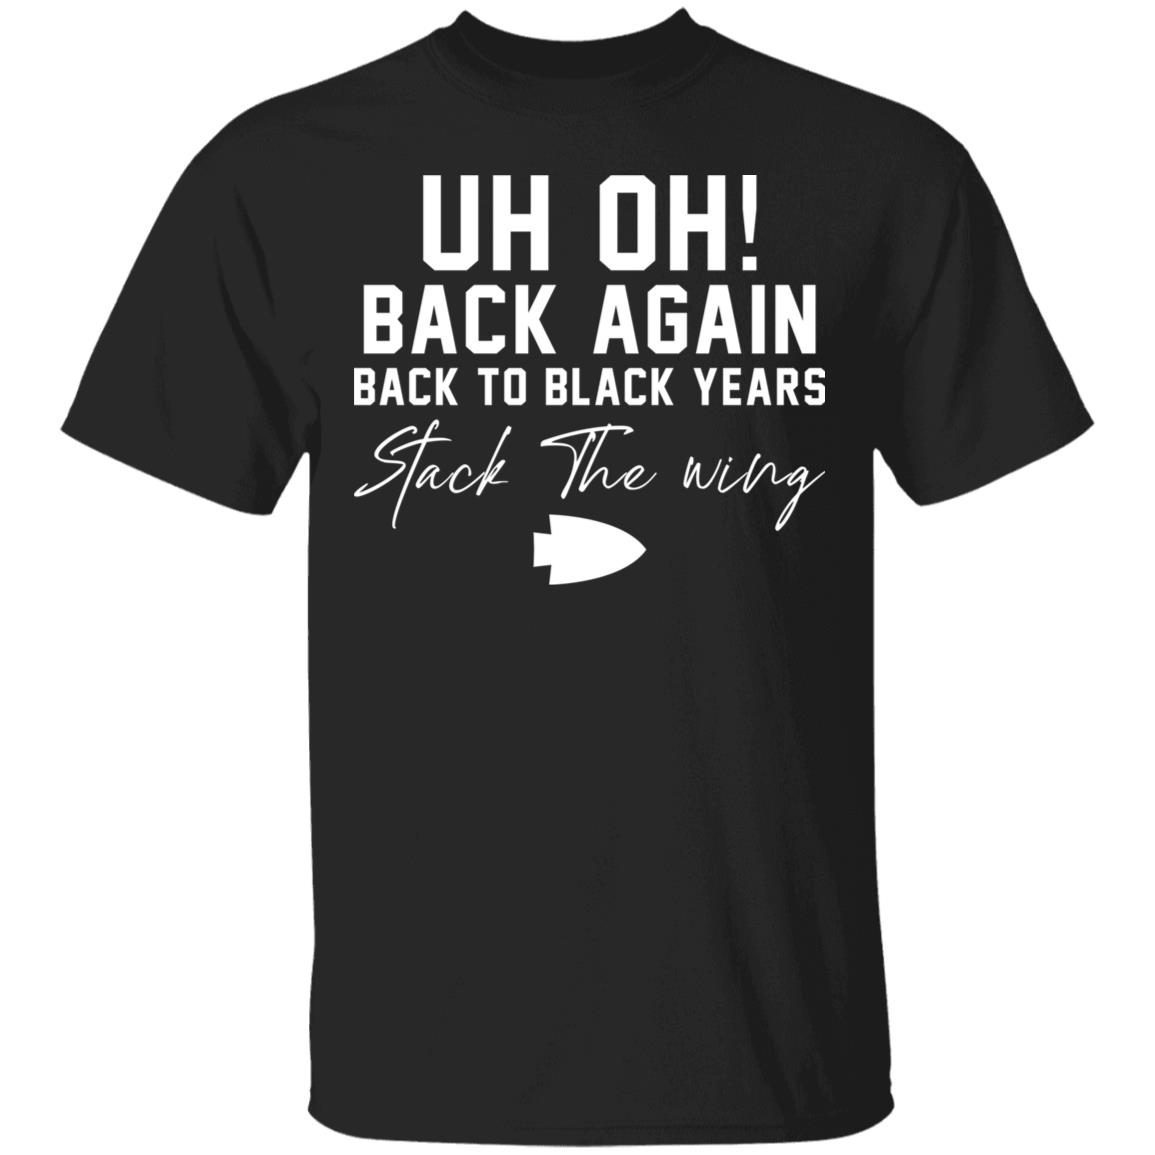 Uh oh back again back to black years stack the wing shirt 5